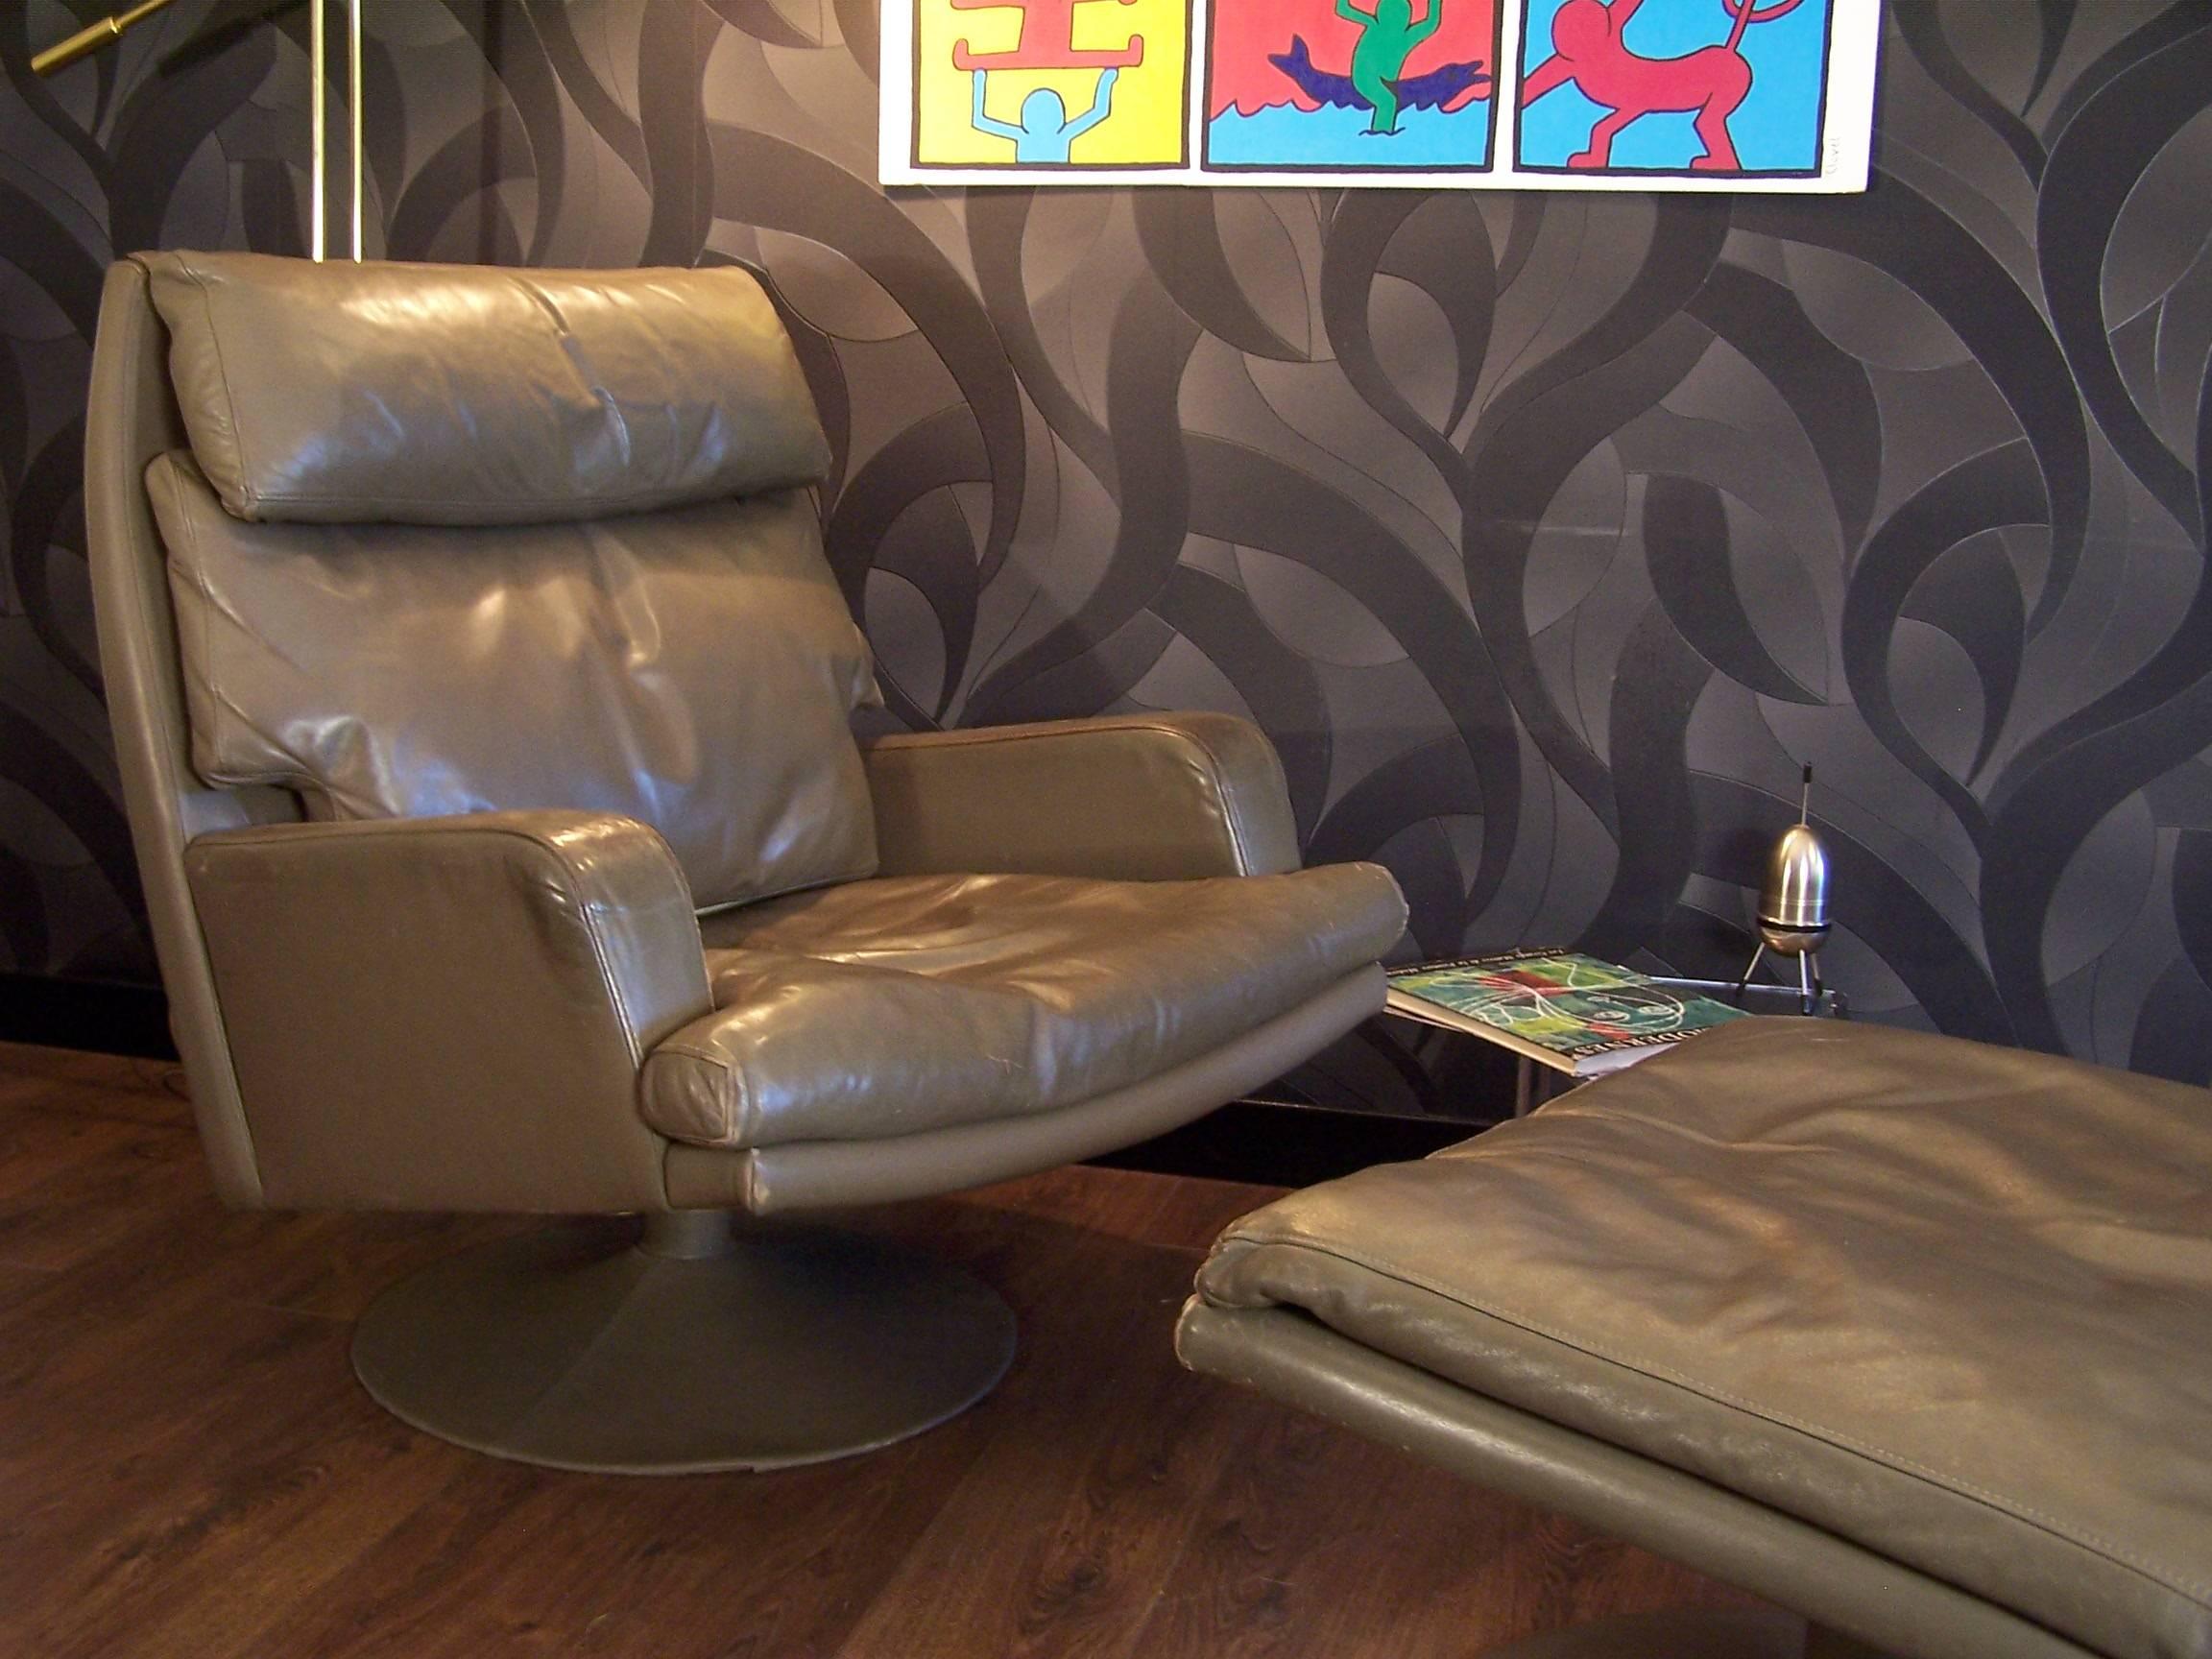 This leather swivel chair and ottoman has a nice patina, and the cushions are stuffed with goose feathers.